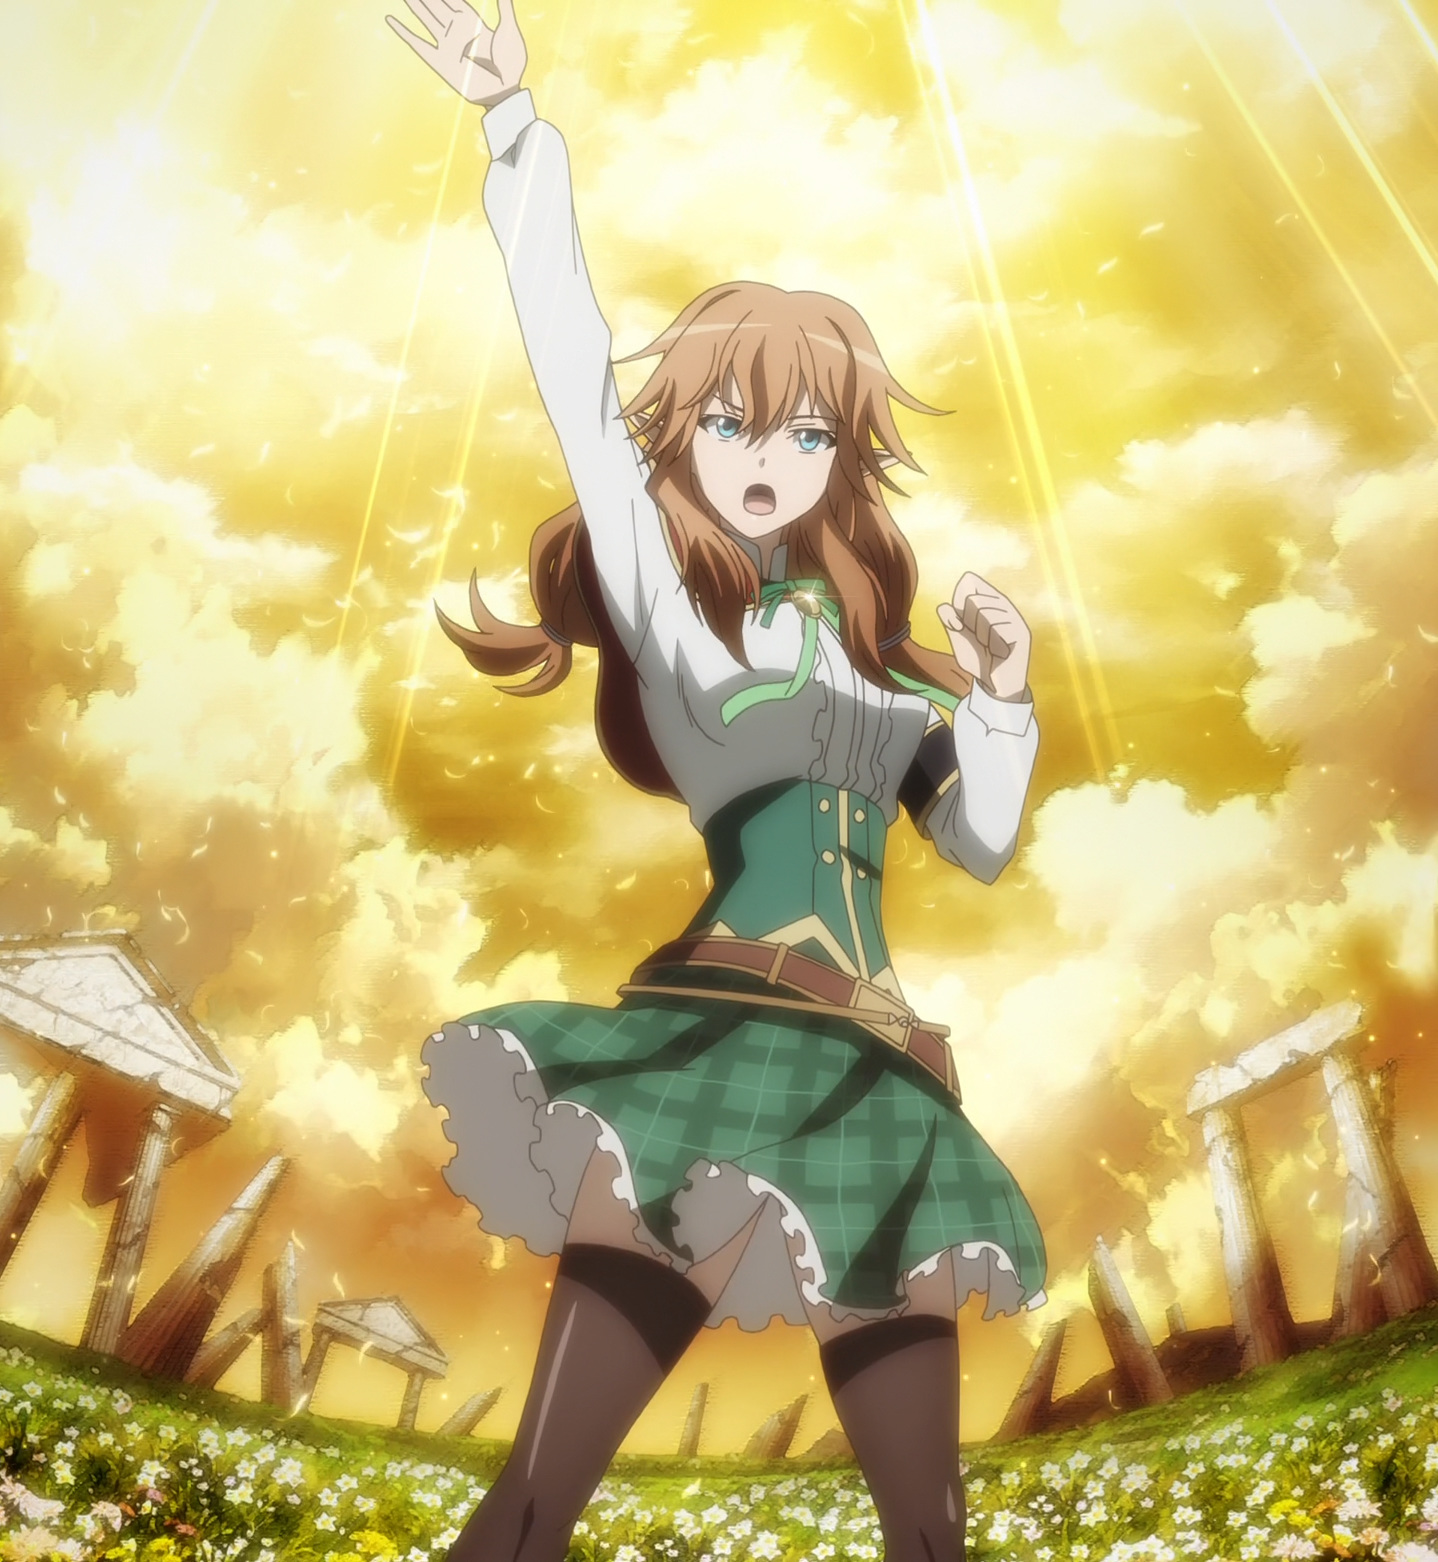 Manaria Friends Episode 1 Review - Anime Shelter